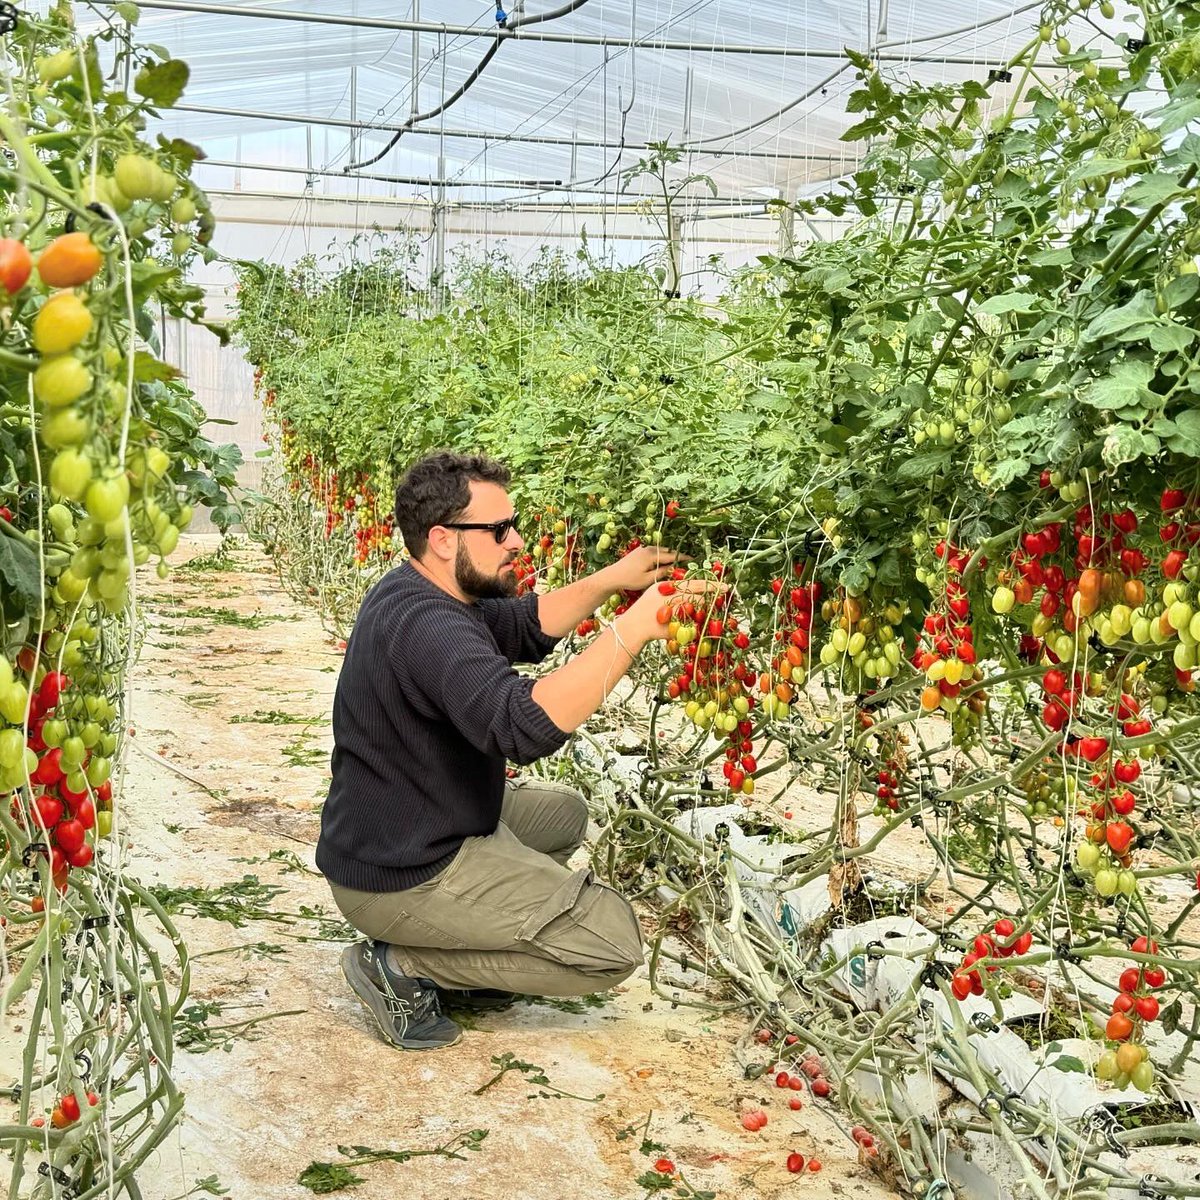 𝙏𝙊𝙈𝘼𝙏𝙍𝘼𝘾𝙆 𝘿𝙖𝙡 𝙨𝙚𝙢𝙚 𝙖𝙡𝙡𝙖 𝙩𝙖𝙫𝙤𝙡𝙖 is a project that brings our holistic agricultural approach to the tomato supply chain, promoting ecosystem resilience, conservation of biodiversity and sustainable food production. 
tomatrack.eu